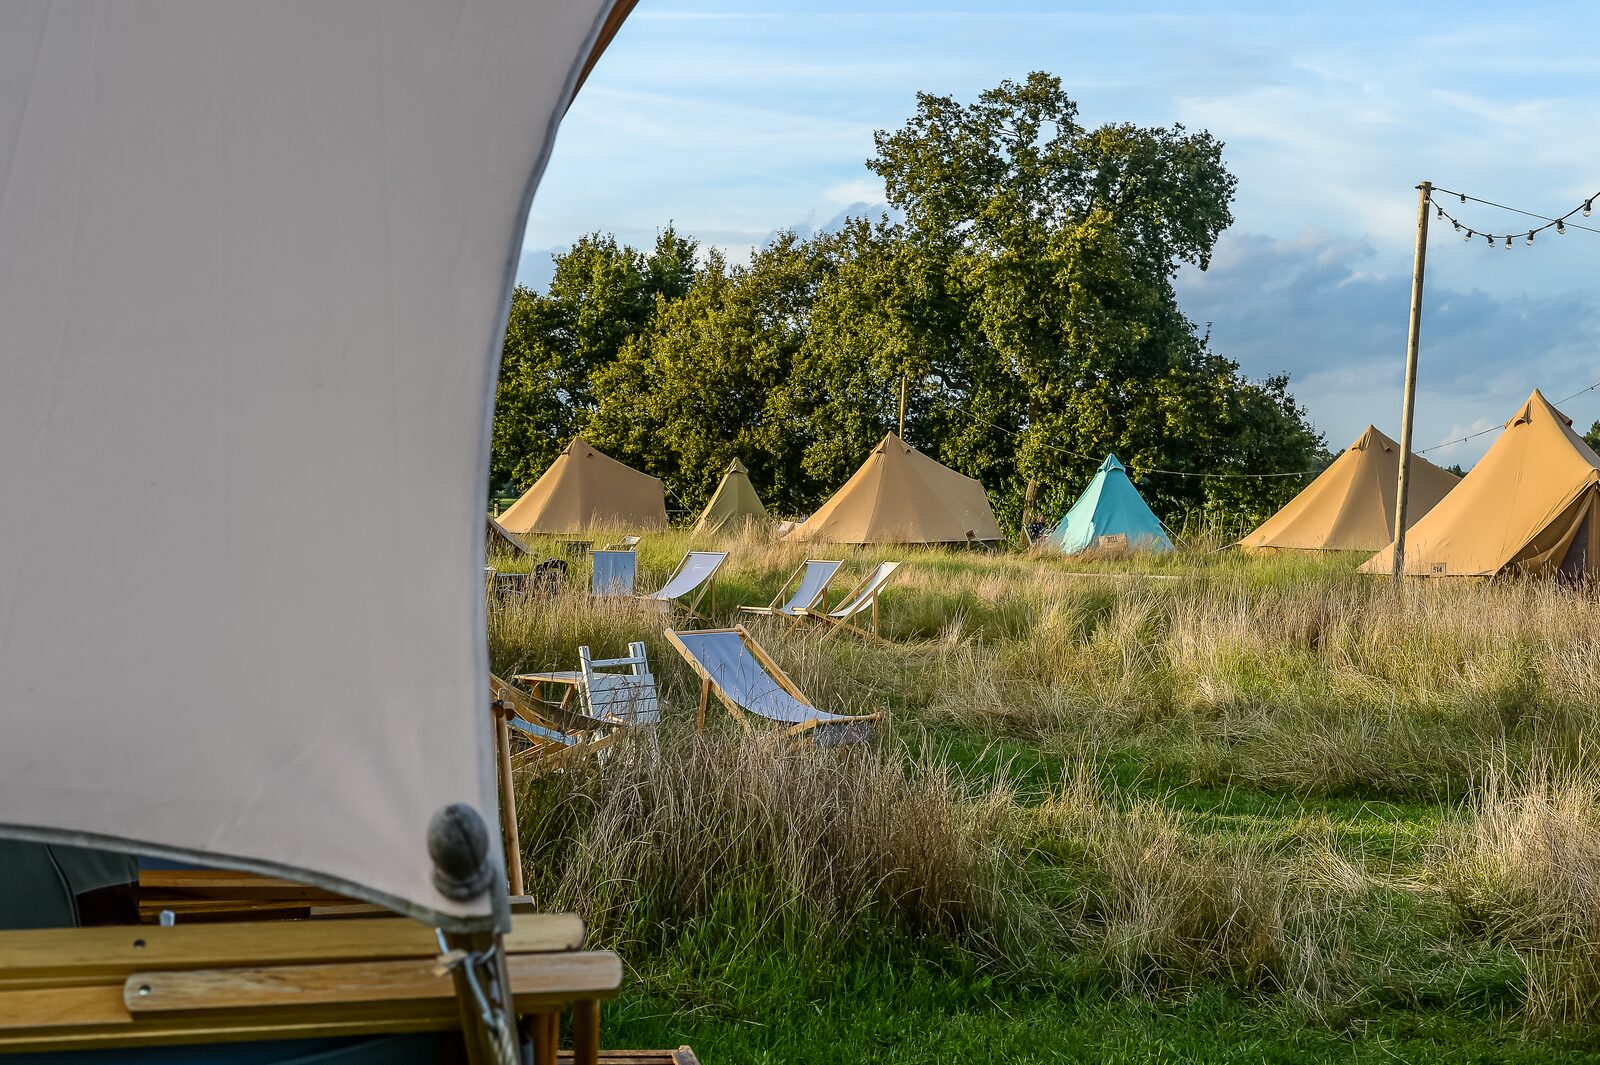 Pop-up glamping 